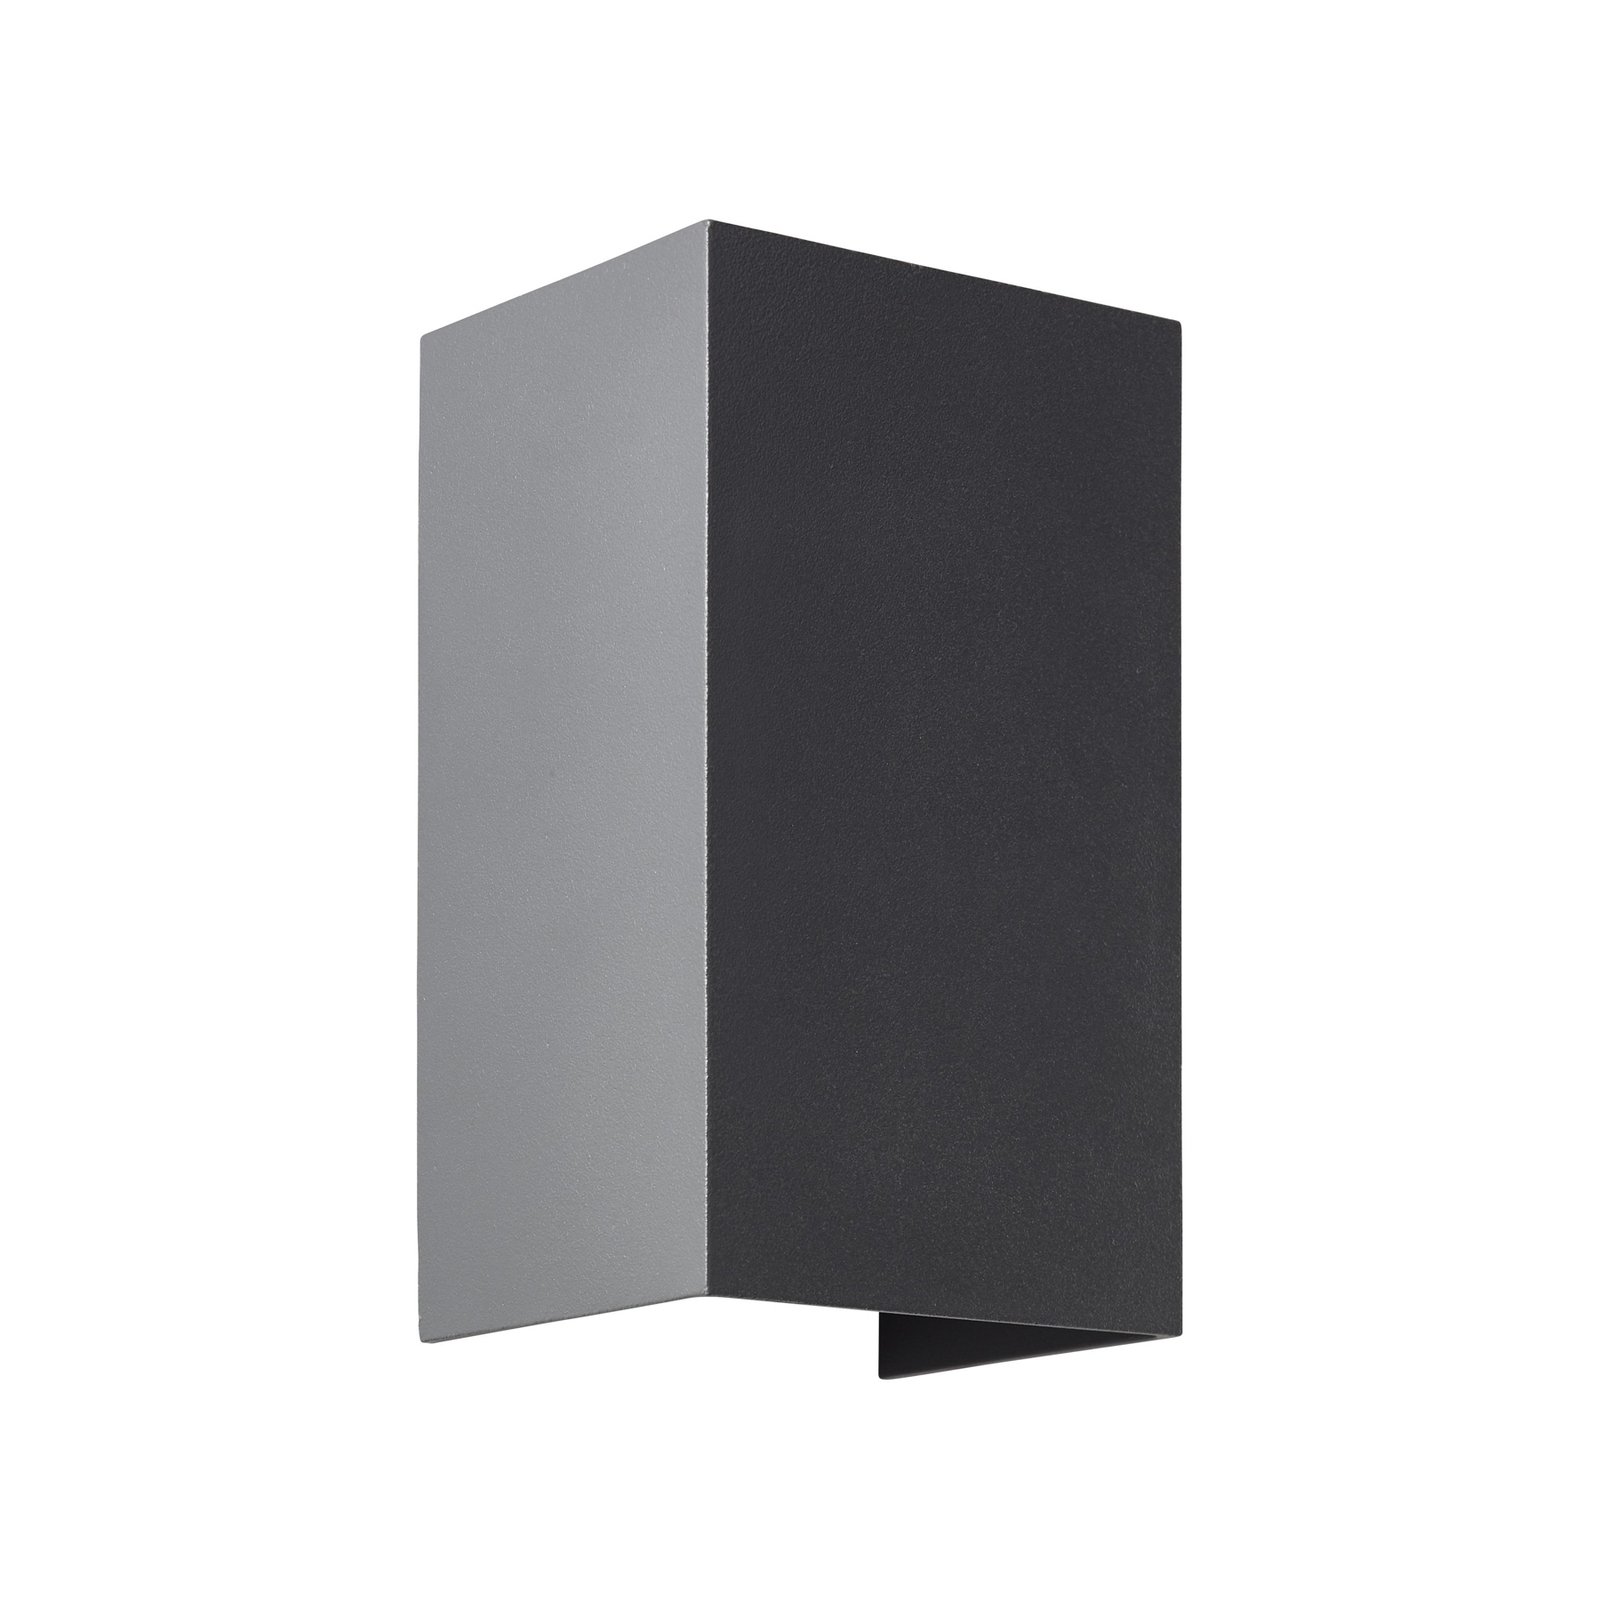 LED outdoor wall light Hilly, height 13.6 cm, dark grey, metal